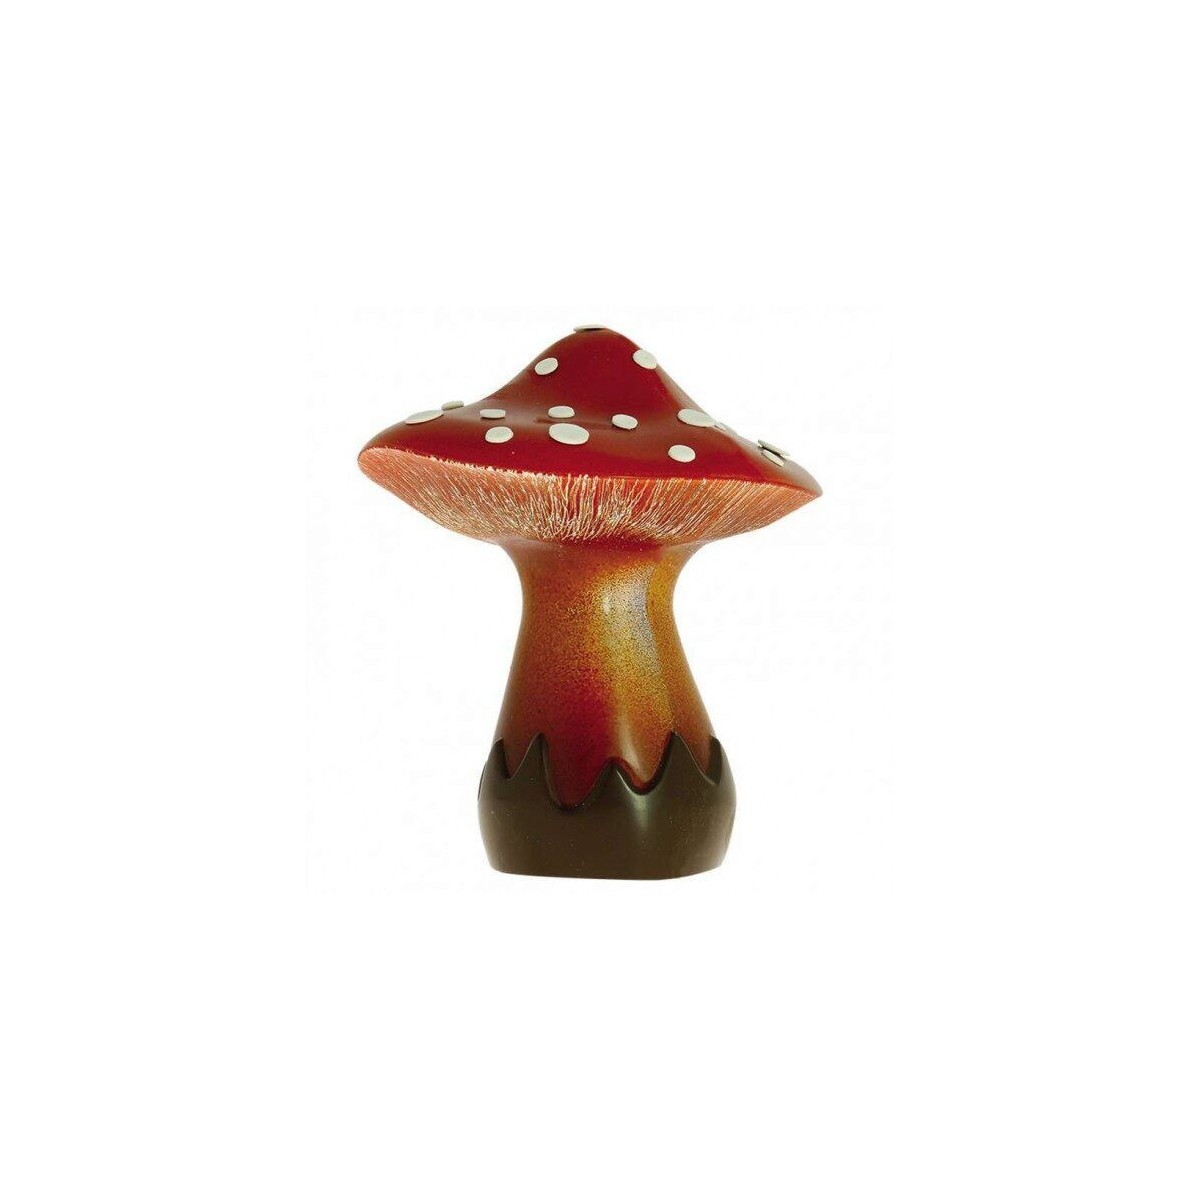 CHOCOLATE MOLD SMALL MUSHROOM 9XHT 11CM PACKAGE OF